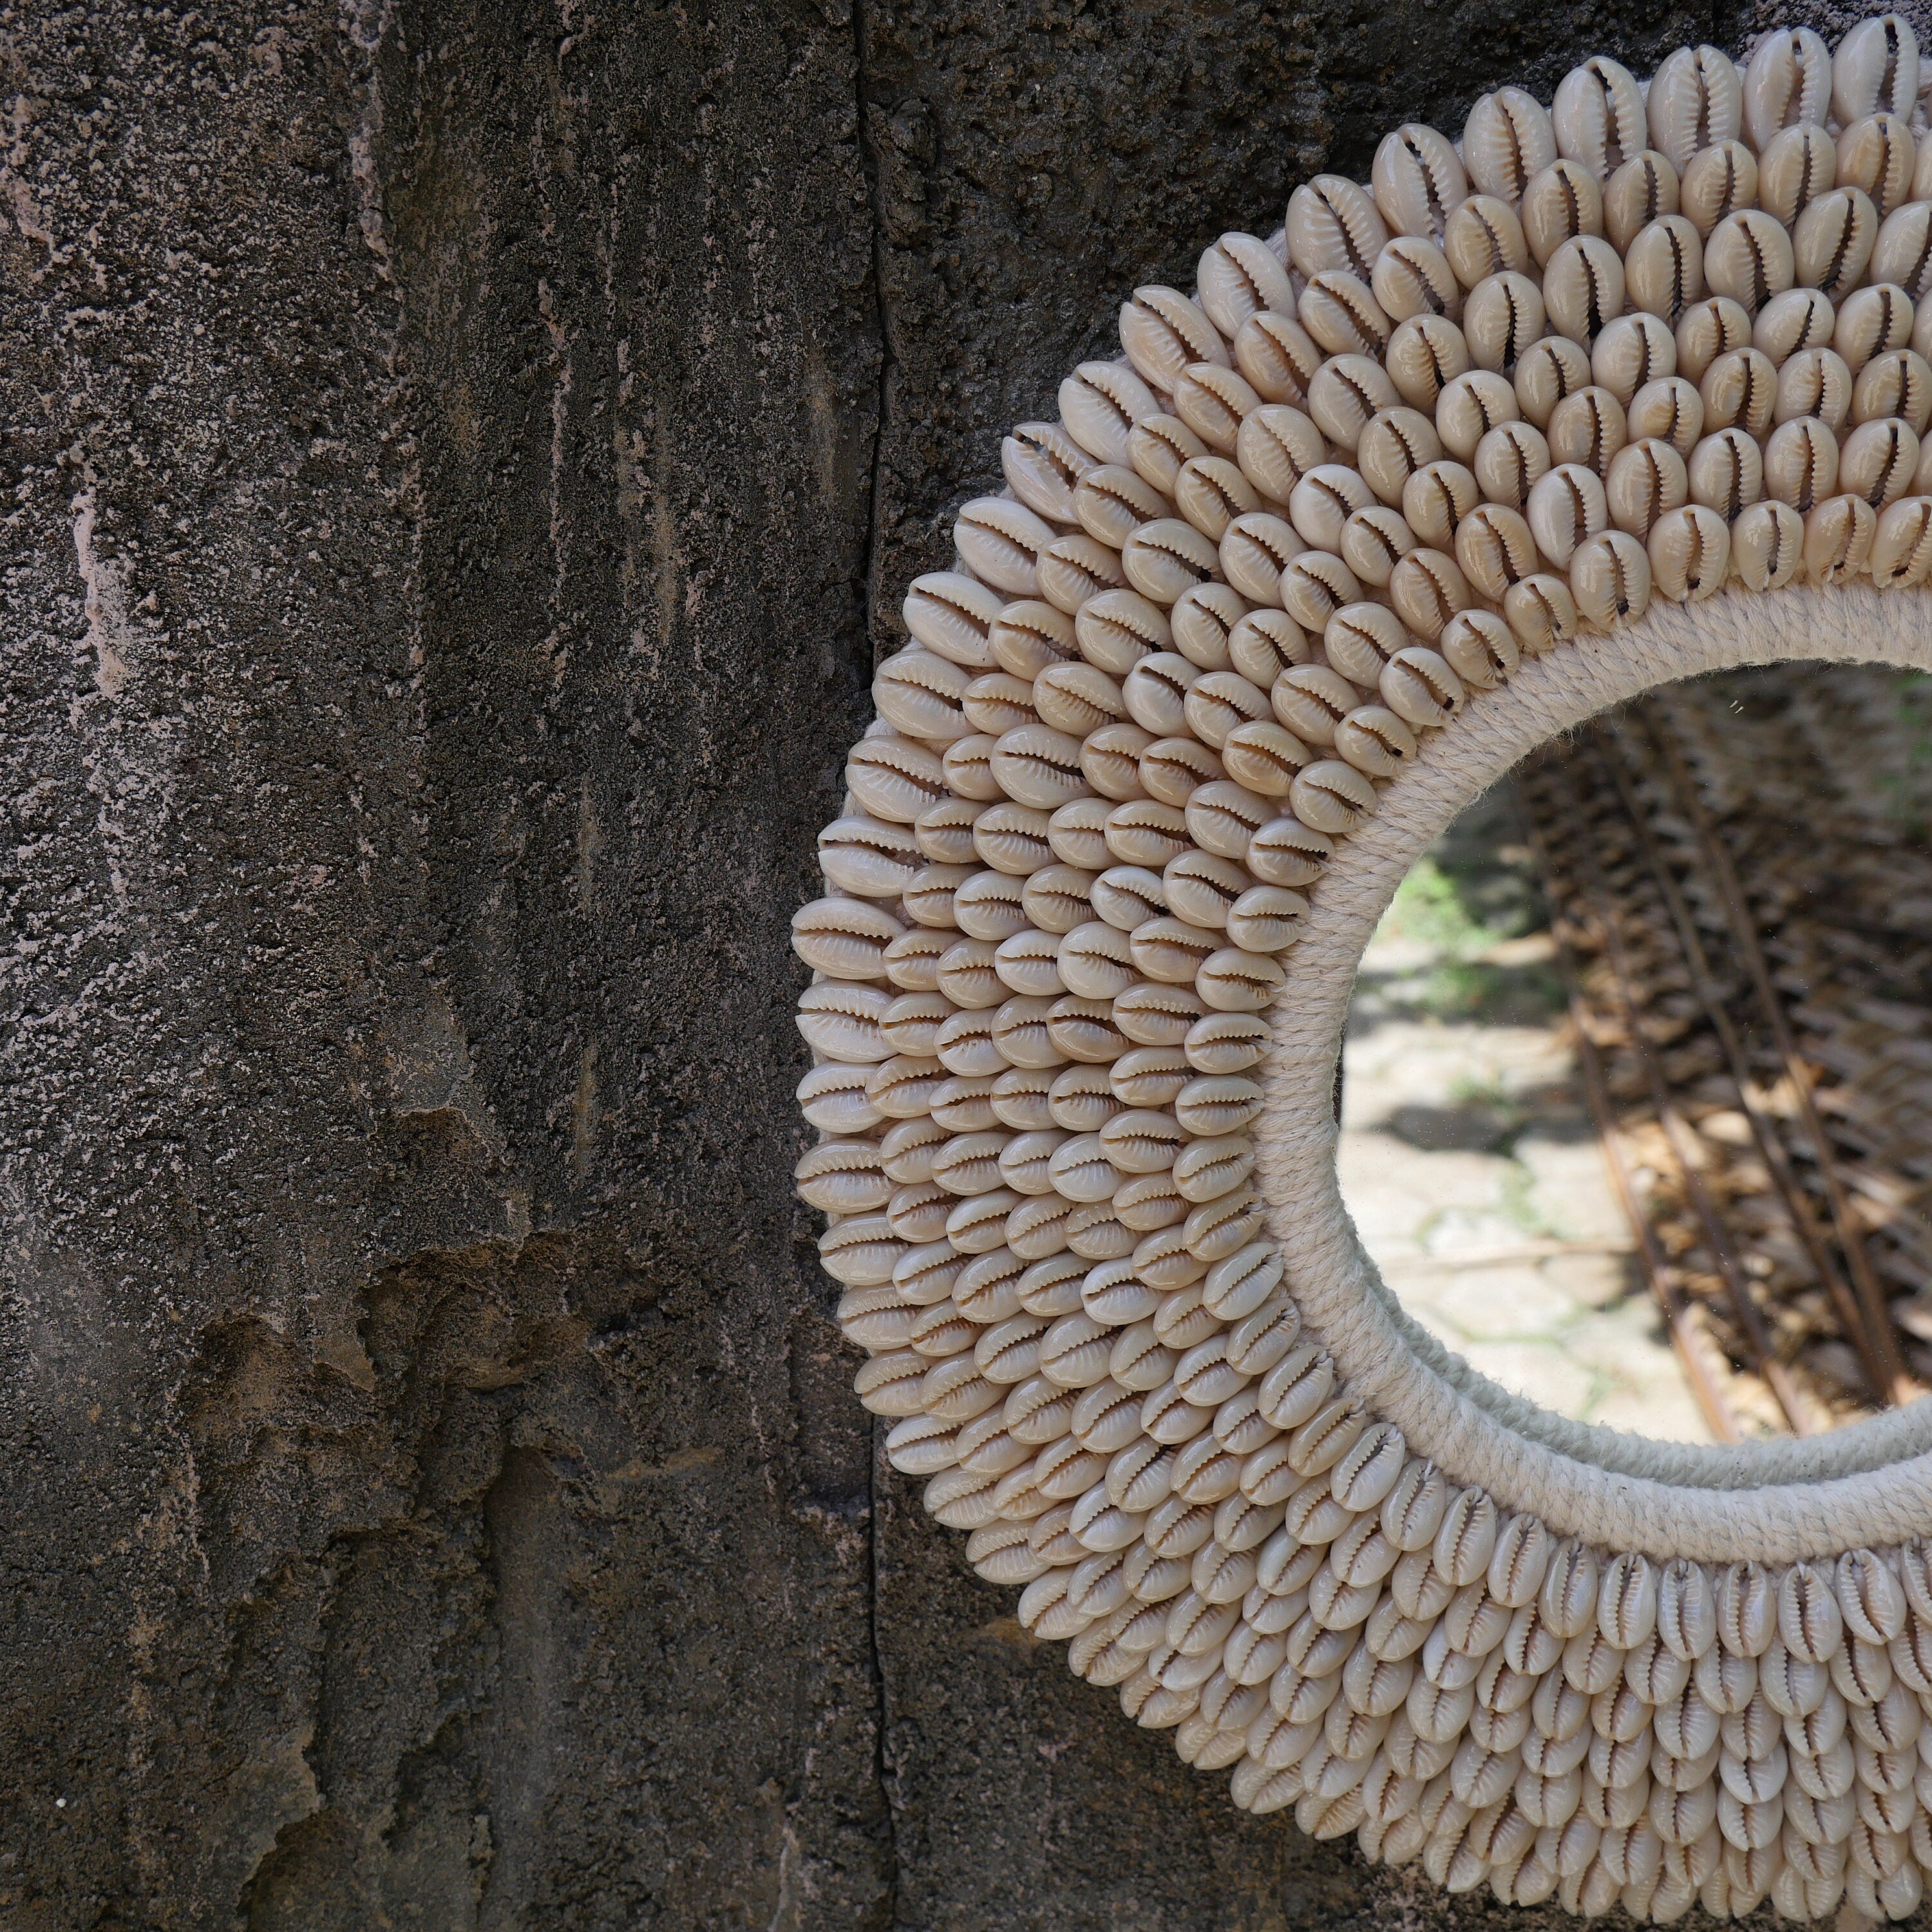 Papua Necklace Inspired Mirror - Cowrie Shell Mirror - Round Shell Mirror - Wall Mirror - Boho Mirror - Beach House Mirror